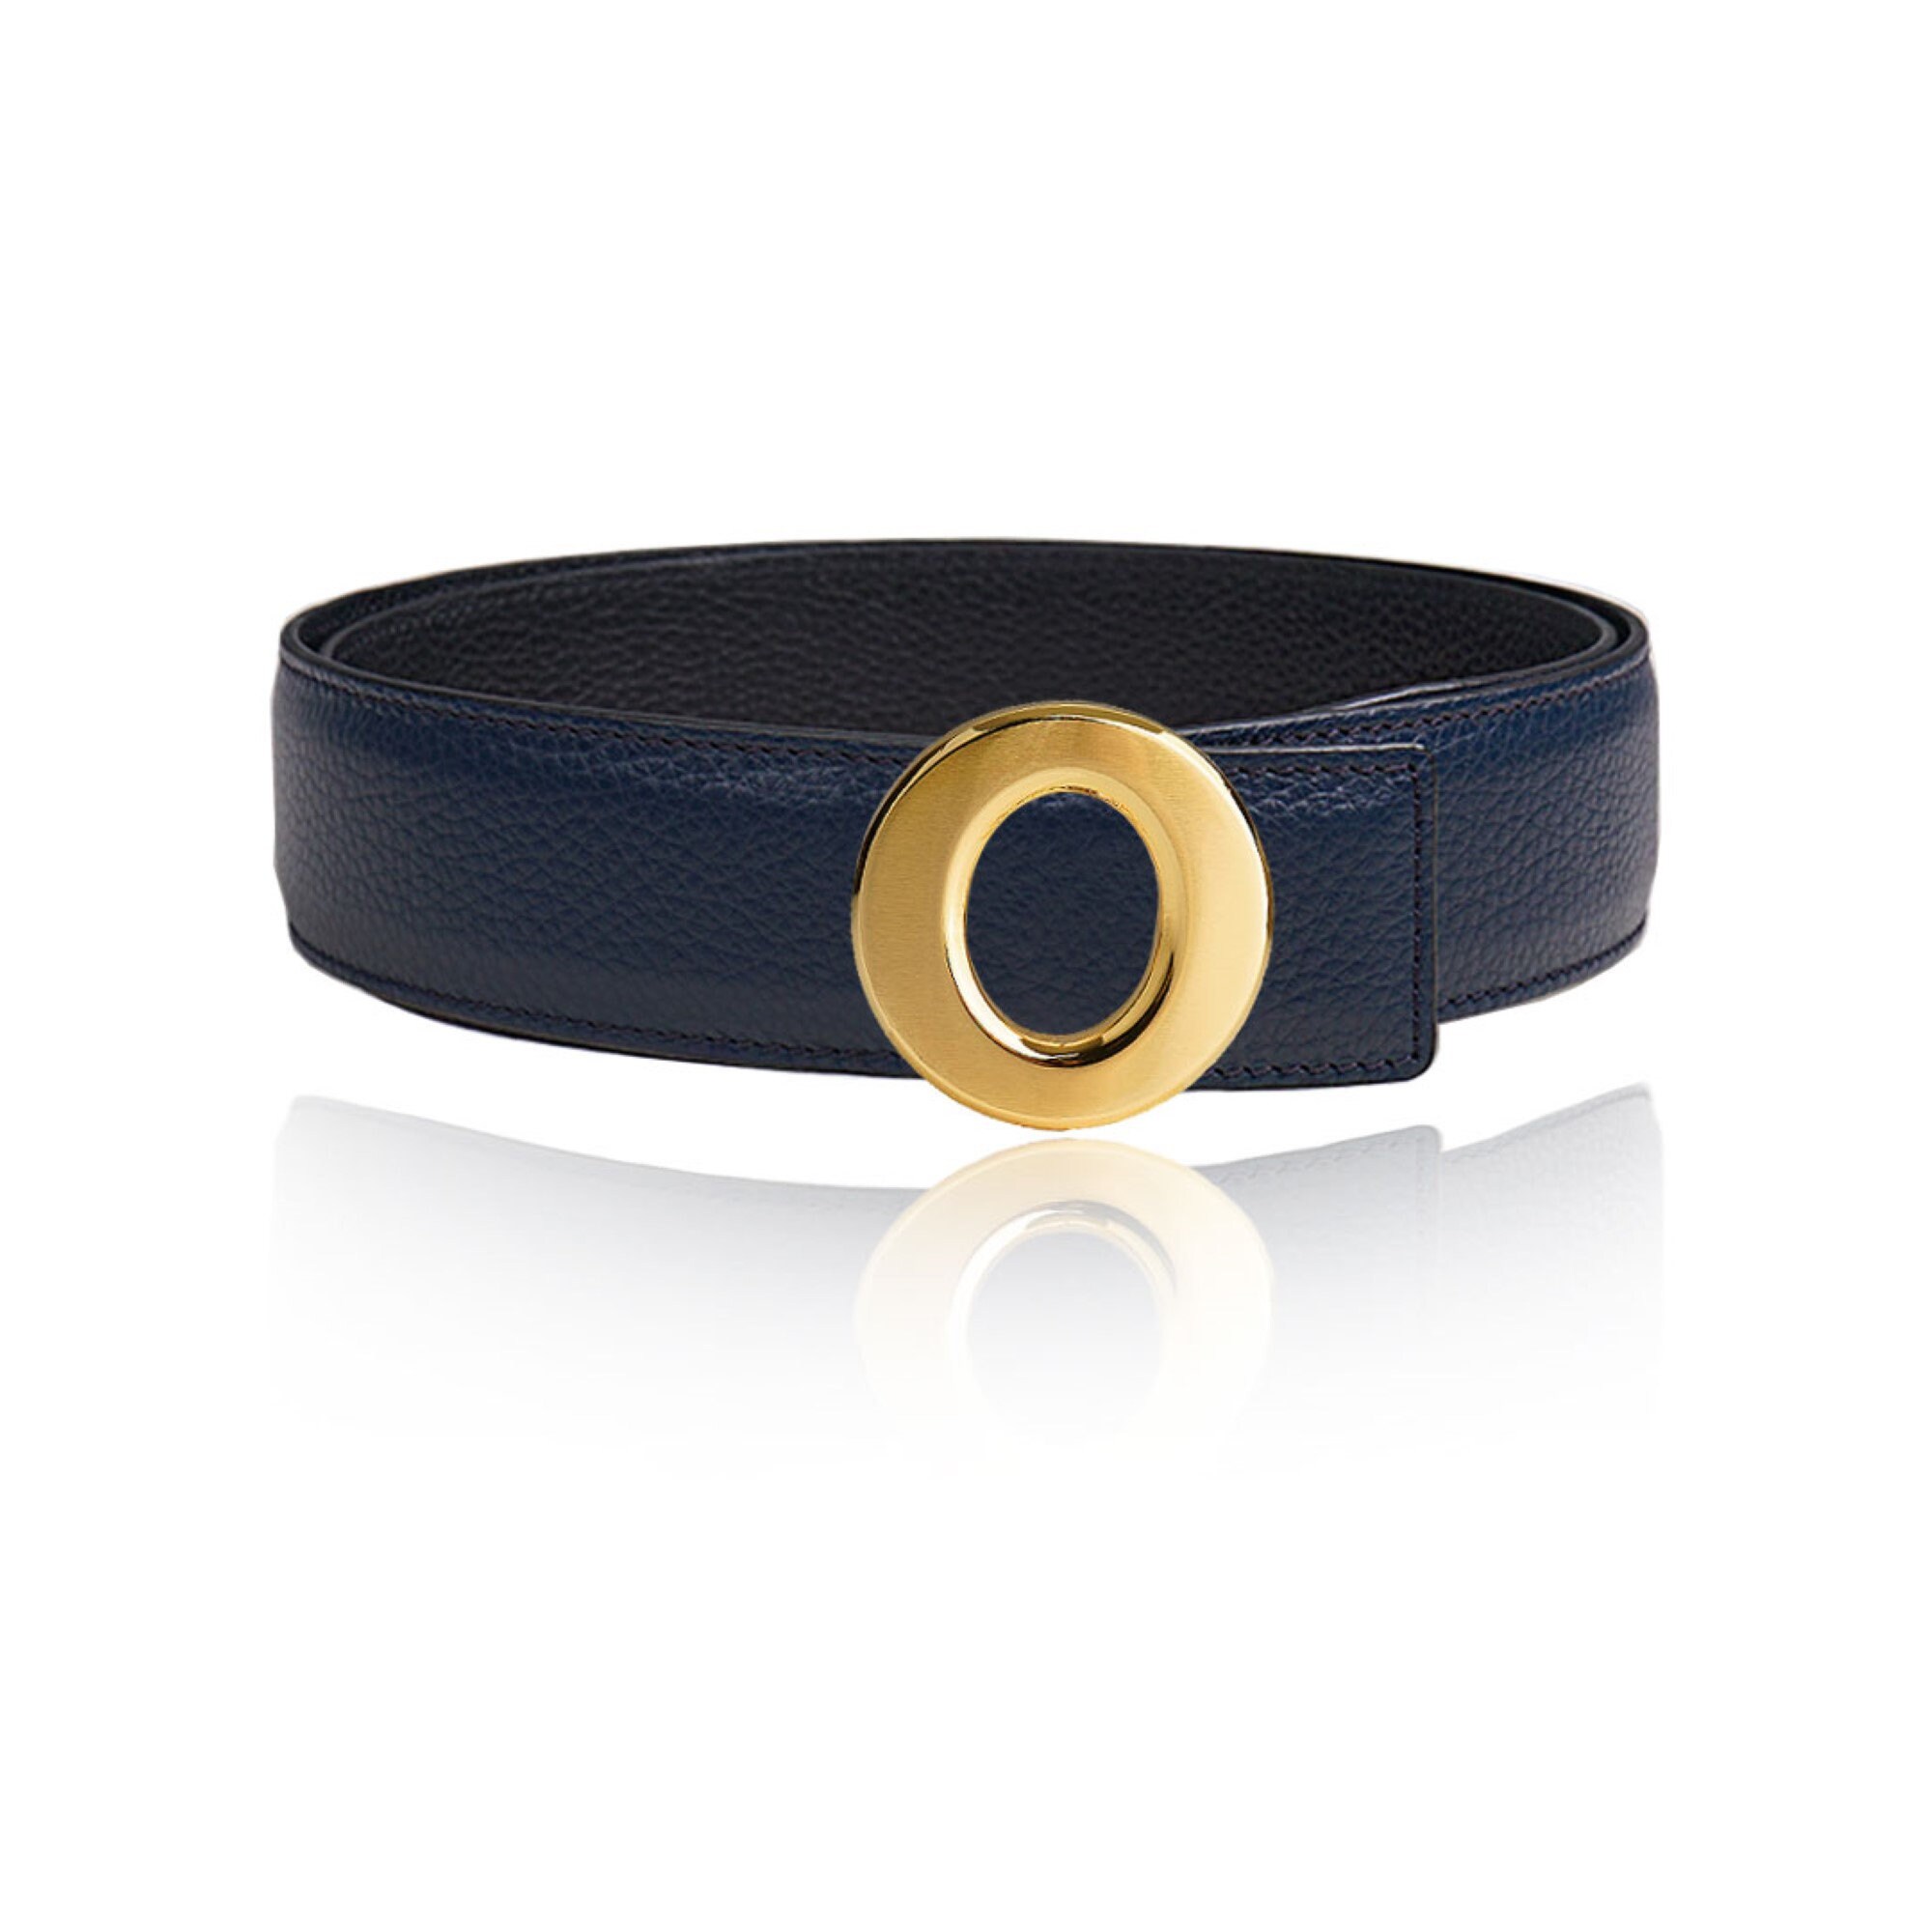 Leather belt in dark blue with Y buckle 32mm